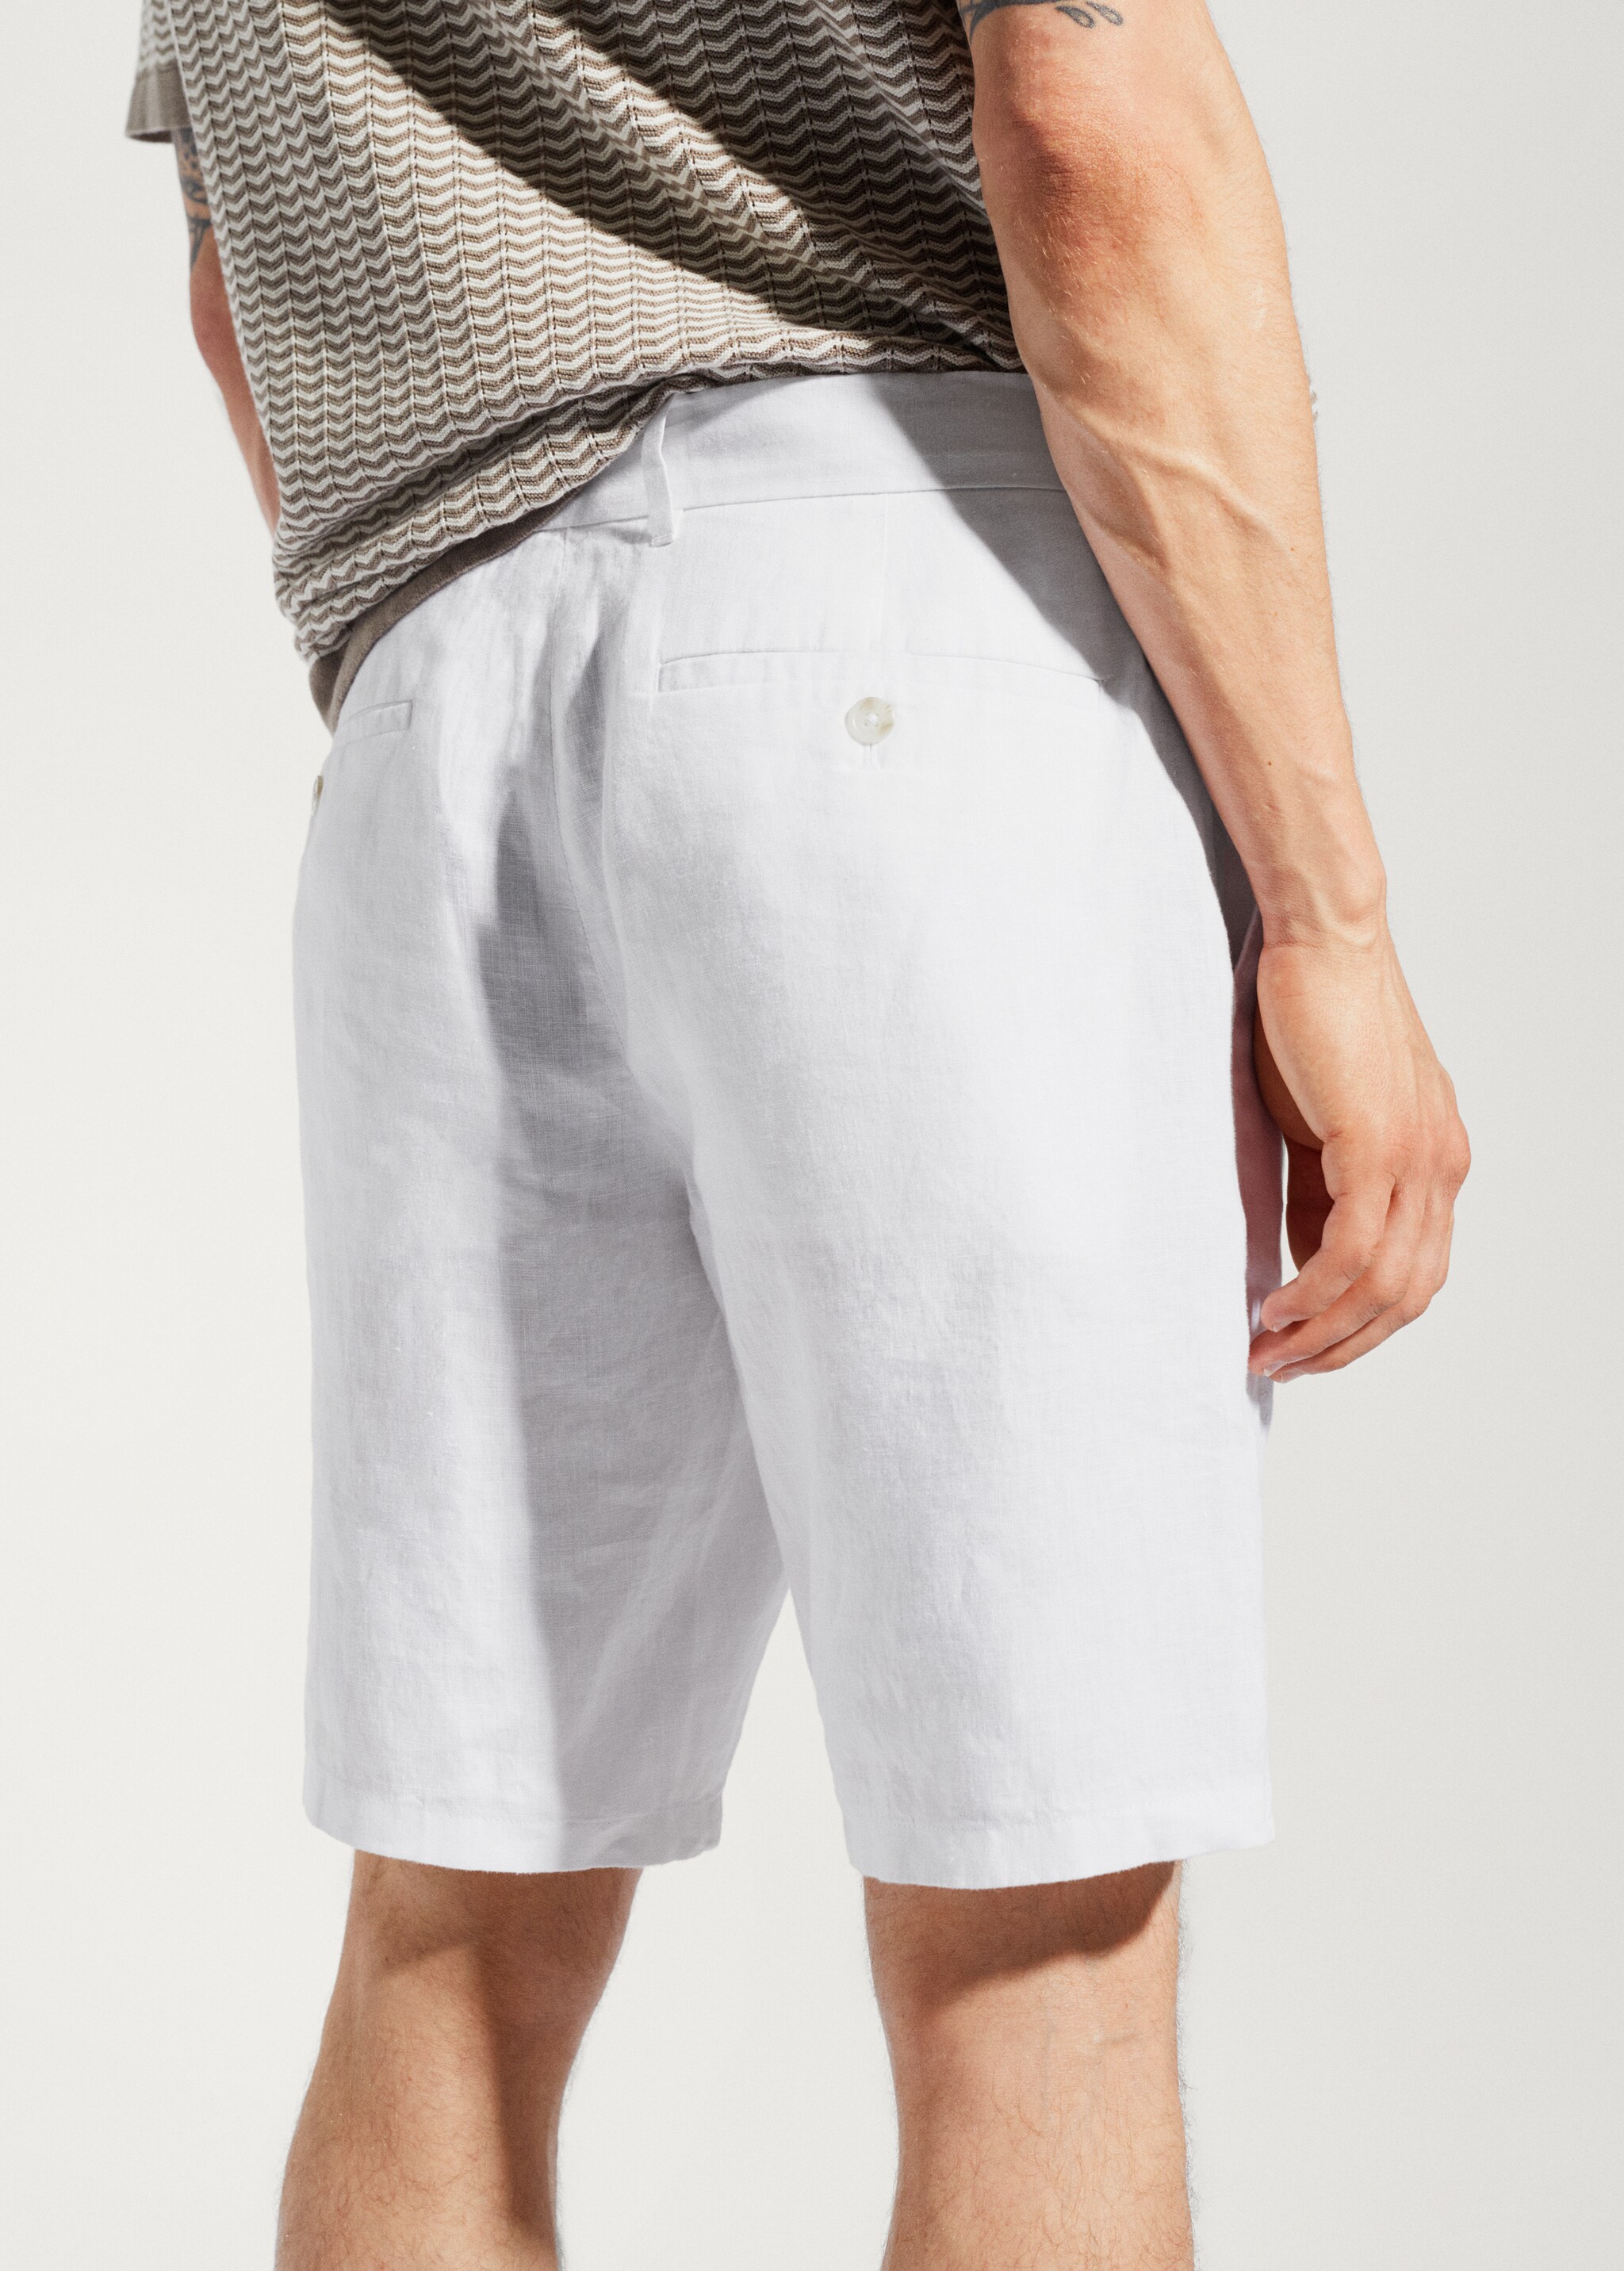 100% linen shorts - Details of the article 2